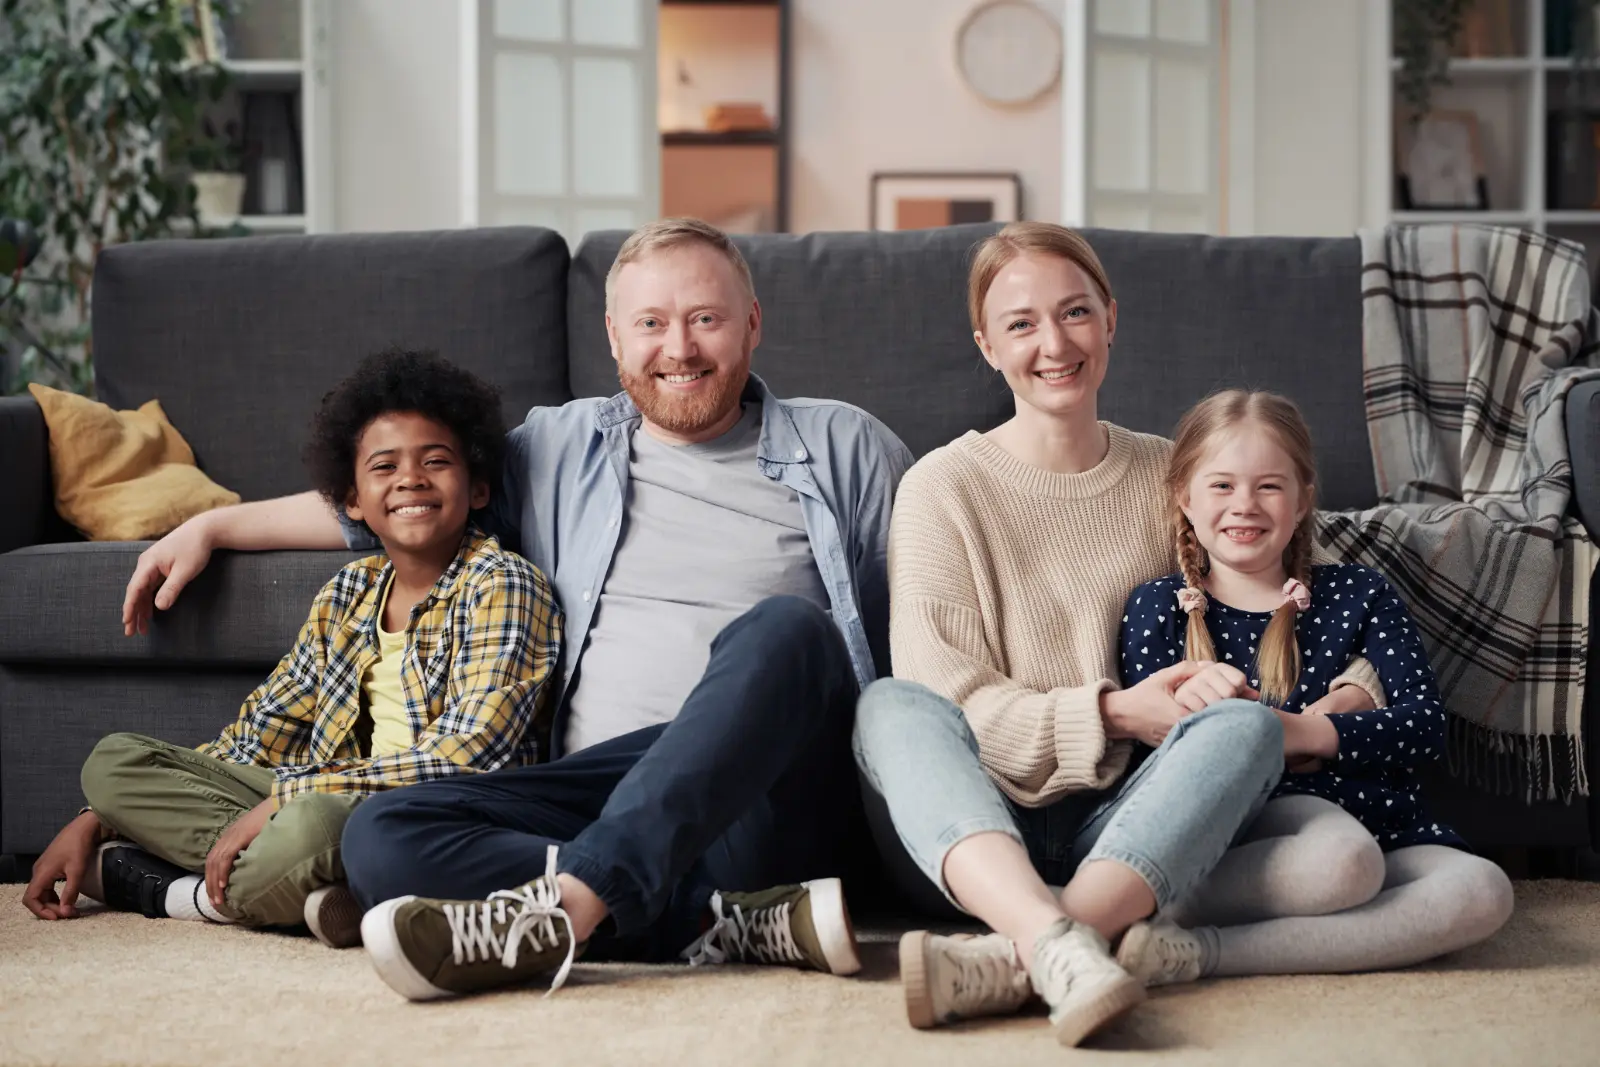 Post-Adoption Meetups With Kids. Portrait of happy family with adopted children sitting on floor in living room and smiling at camera